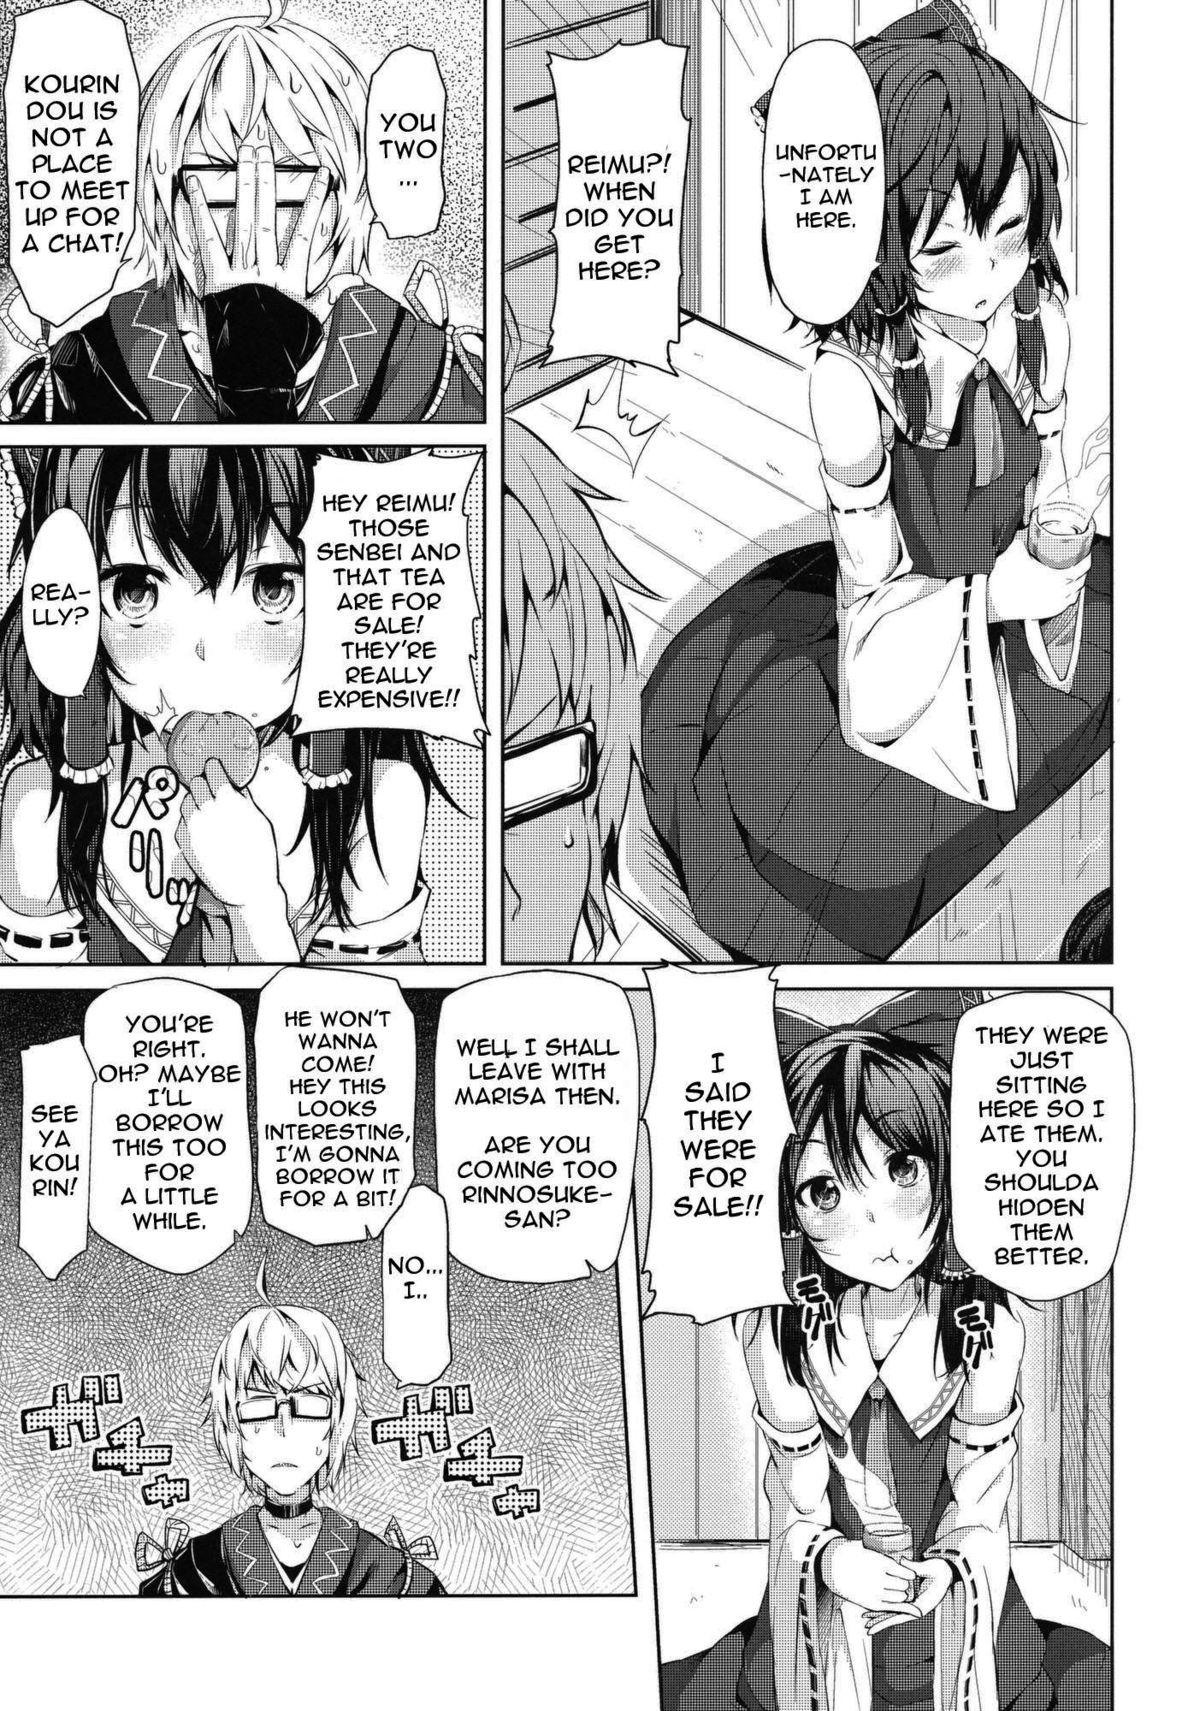 Monster Cock Zutto Kourin no Turn! Turn 1 me | It's Always Kourin's Turn - First Turn - Touhou project Gay Medic - Page 6